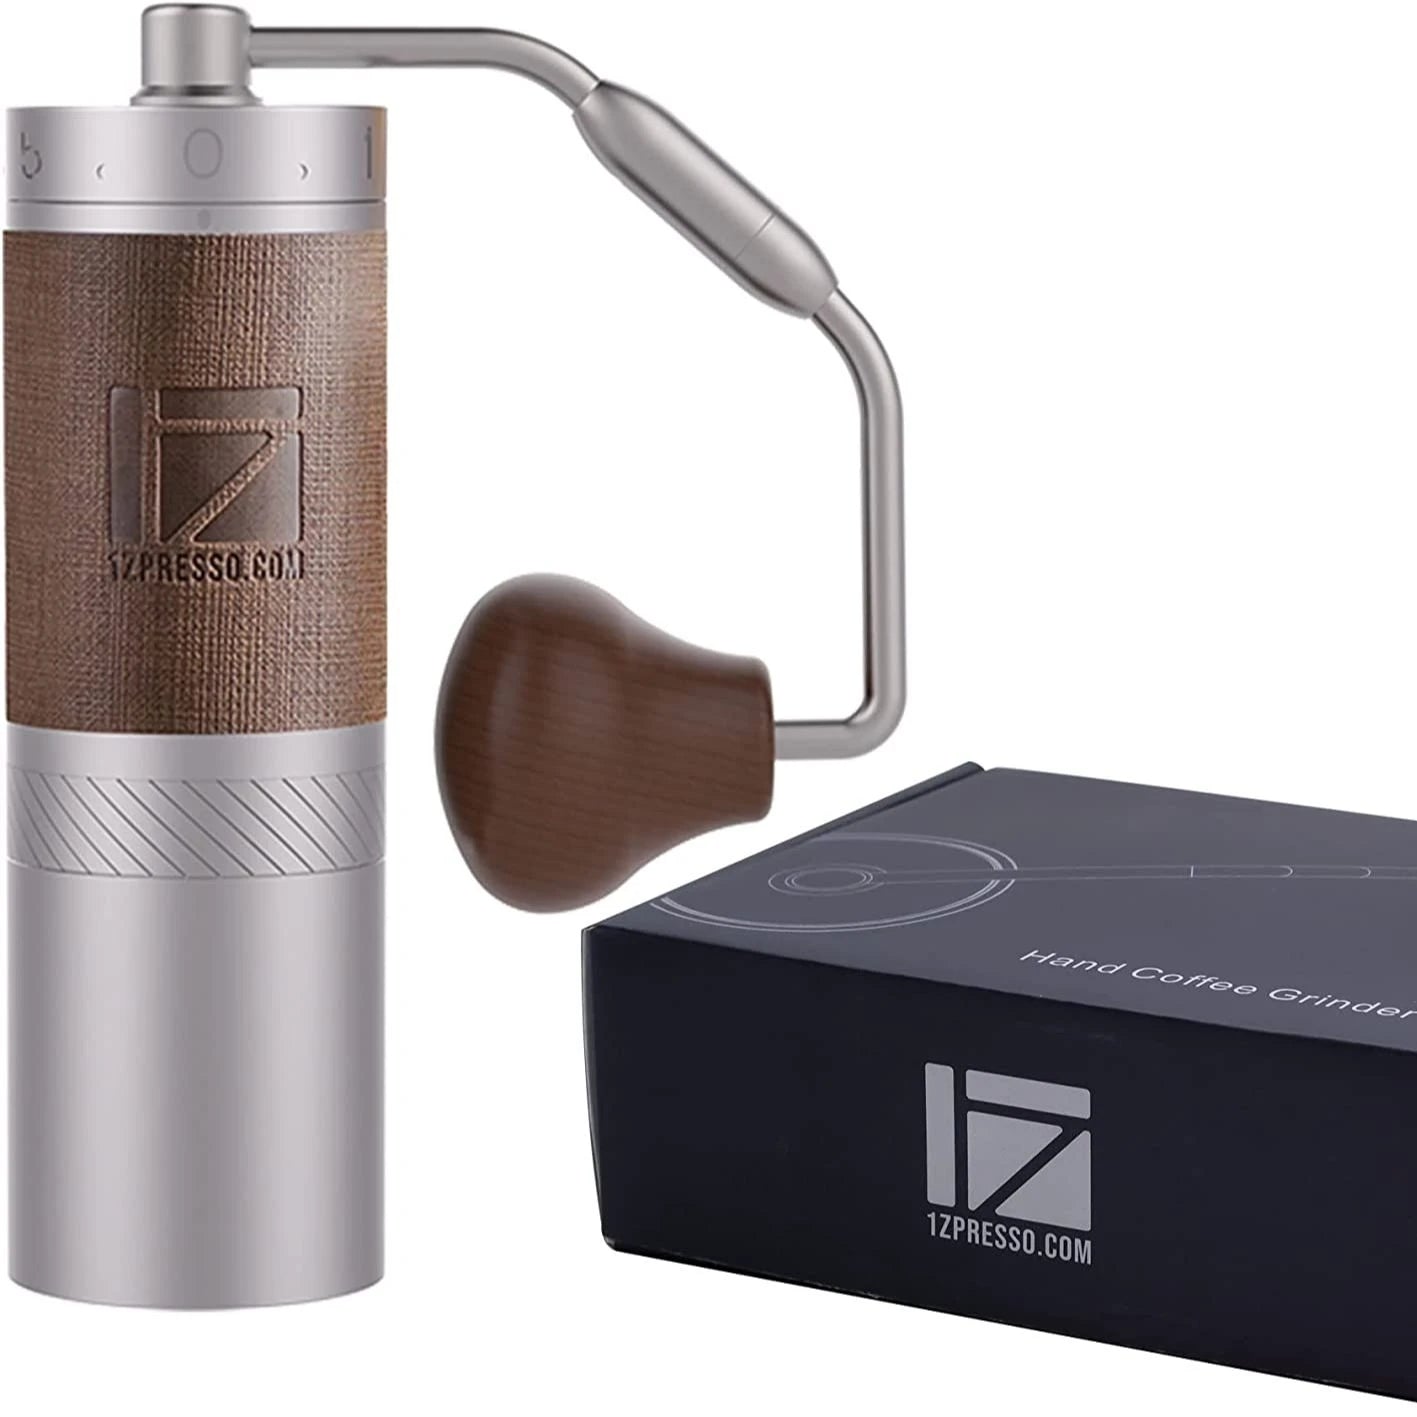 1zpresso X-pro S manual coffee grinder Assembly Stainless Steel Conical Burr 38mm 7core burr dubai uae